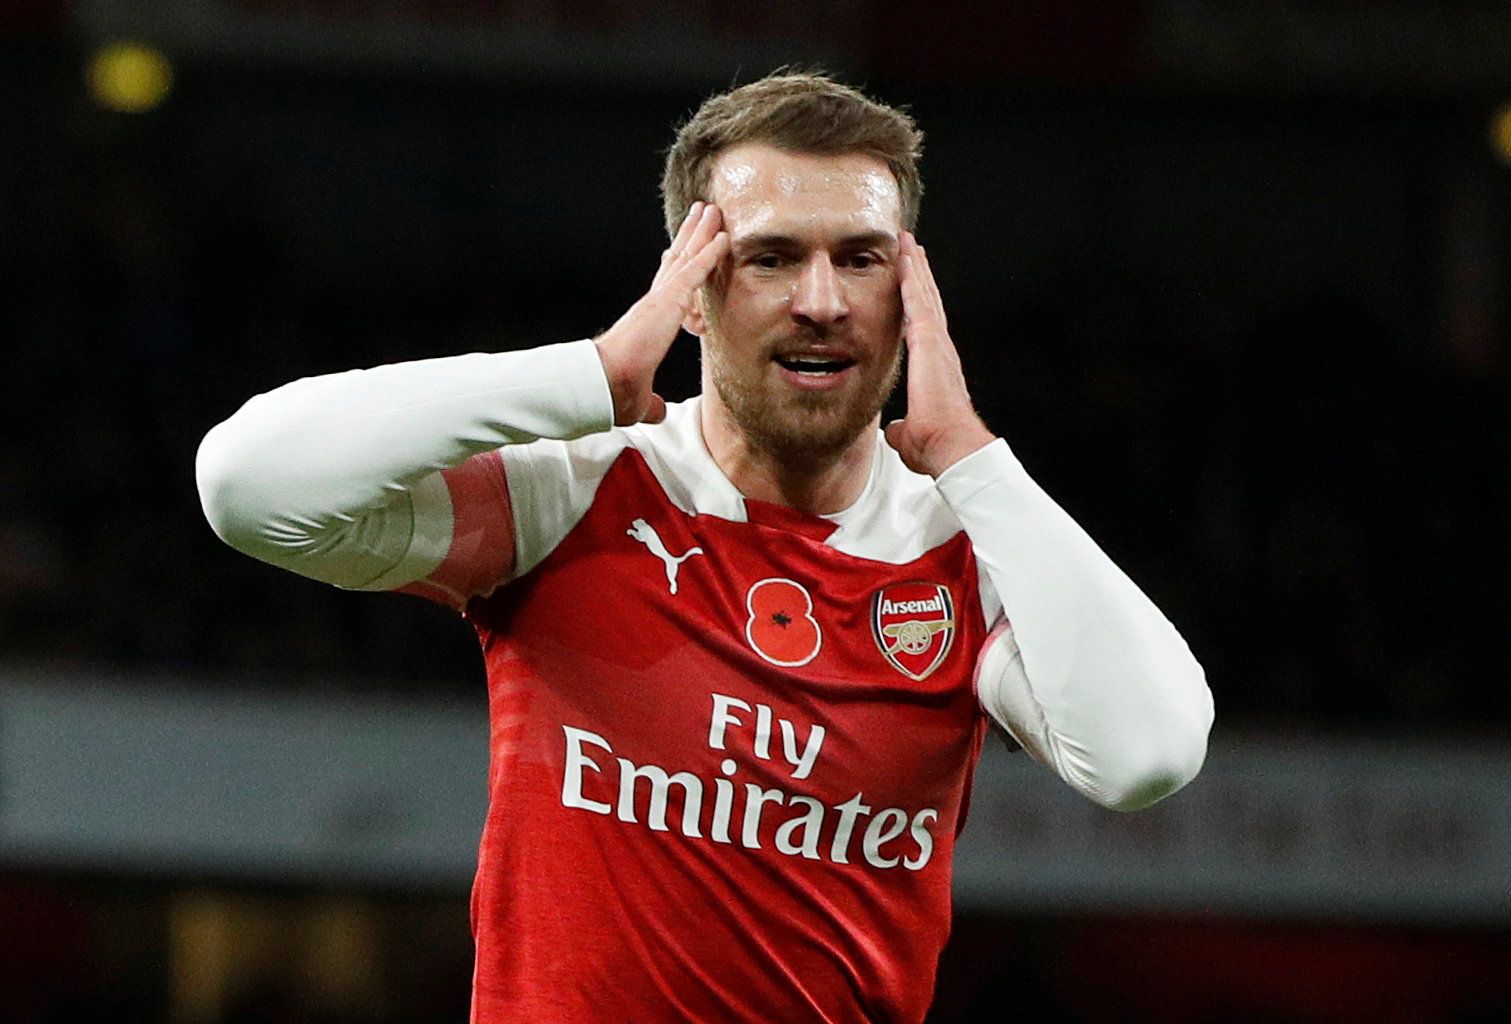 Soccer Football - Premier League - Arsenal v Wolverhampton Wanderers - Emirates Stadium, London, Britain - November 11, 2018  Arsenal's Aaron Ramsey reacts  Action Images via Reuters/John Sibley  EDITORIAL USE ONLY. No use with unauthorized audio, video, data, fixture lists, club/league logos or 